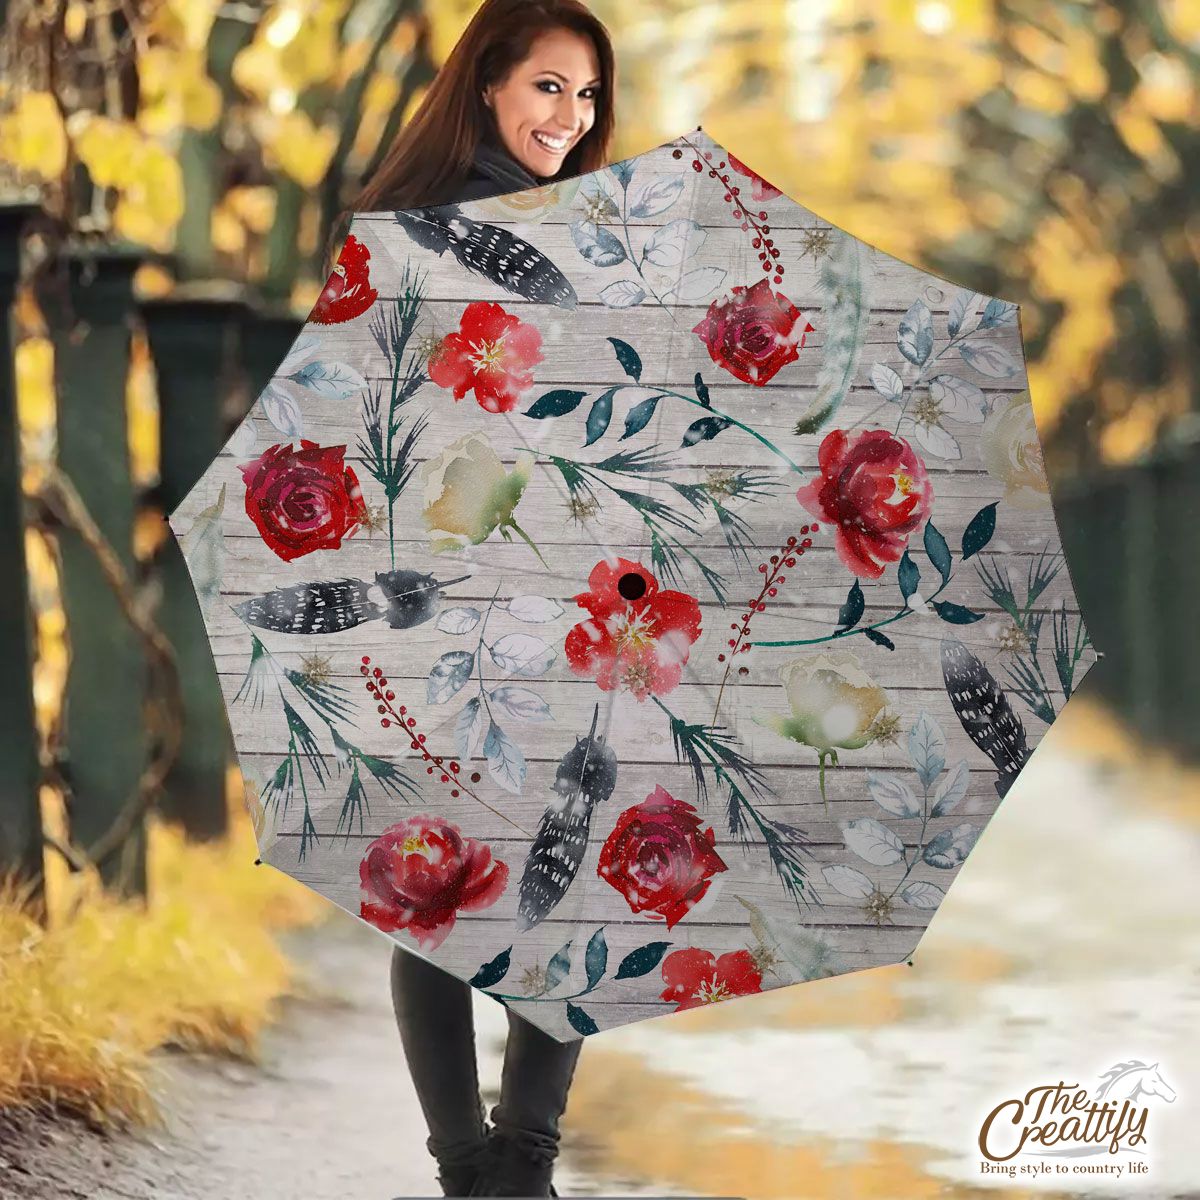 Florals With Red Berries Pattern Umbrella